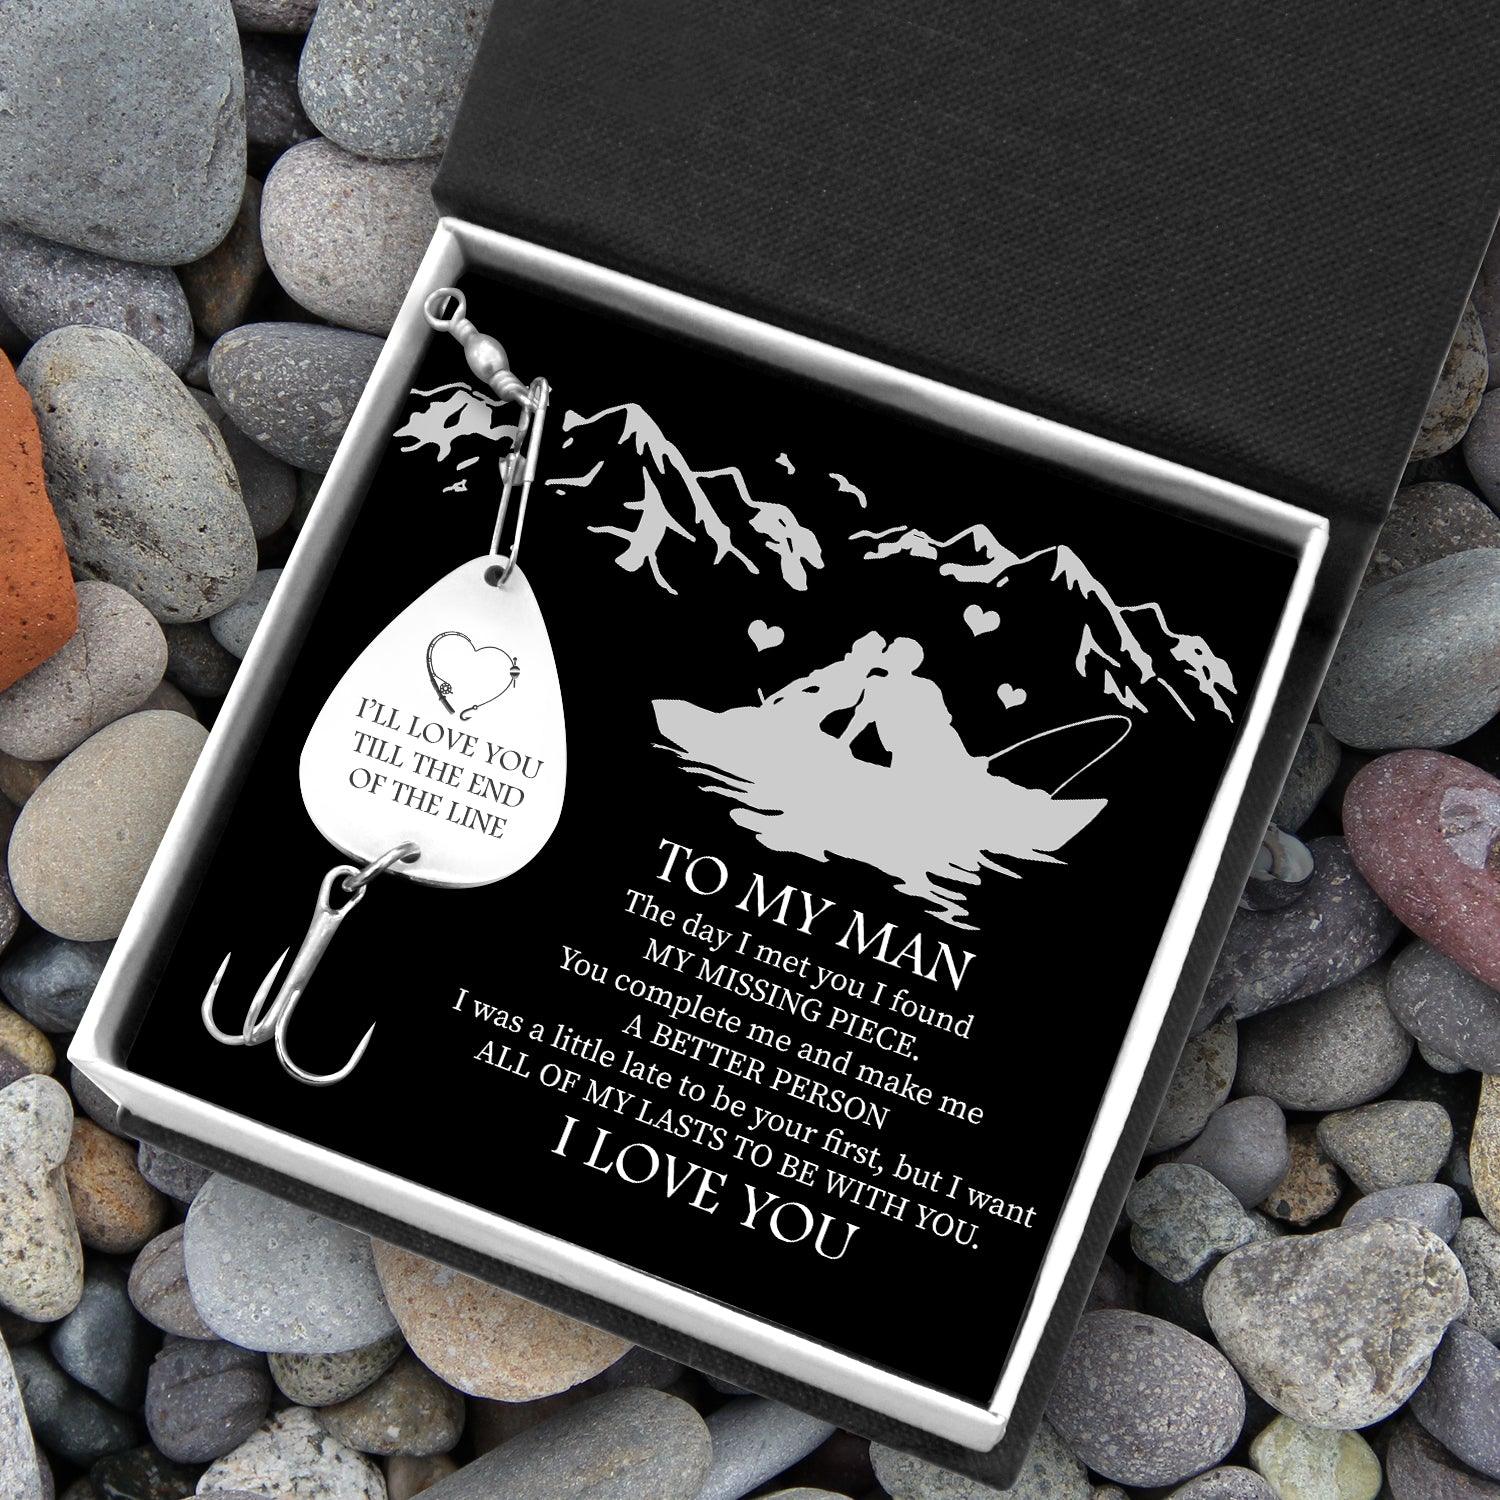 Engraved Fishing Hook - To My Man - I'll Love You Till The End Of The Line - All Of My Lasts To Be With You - Augfa26007 - Gifts Holder